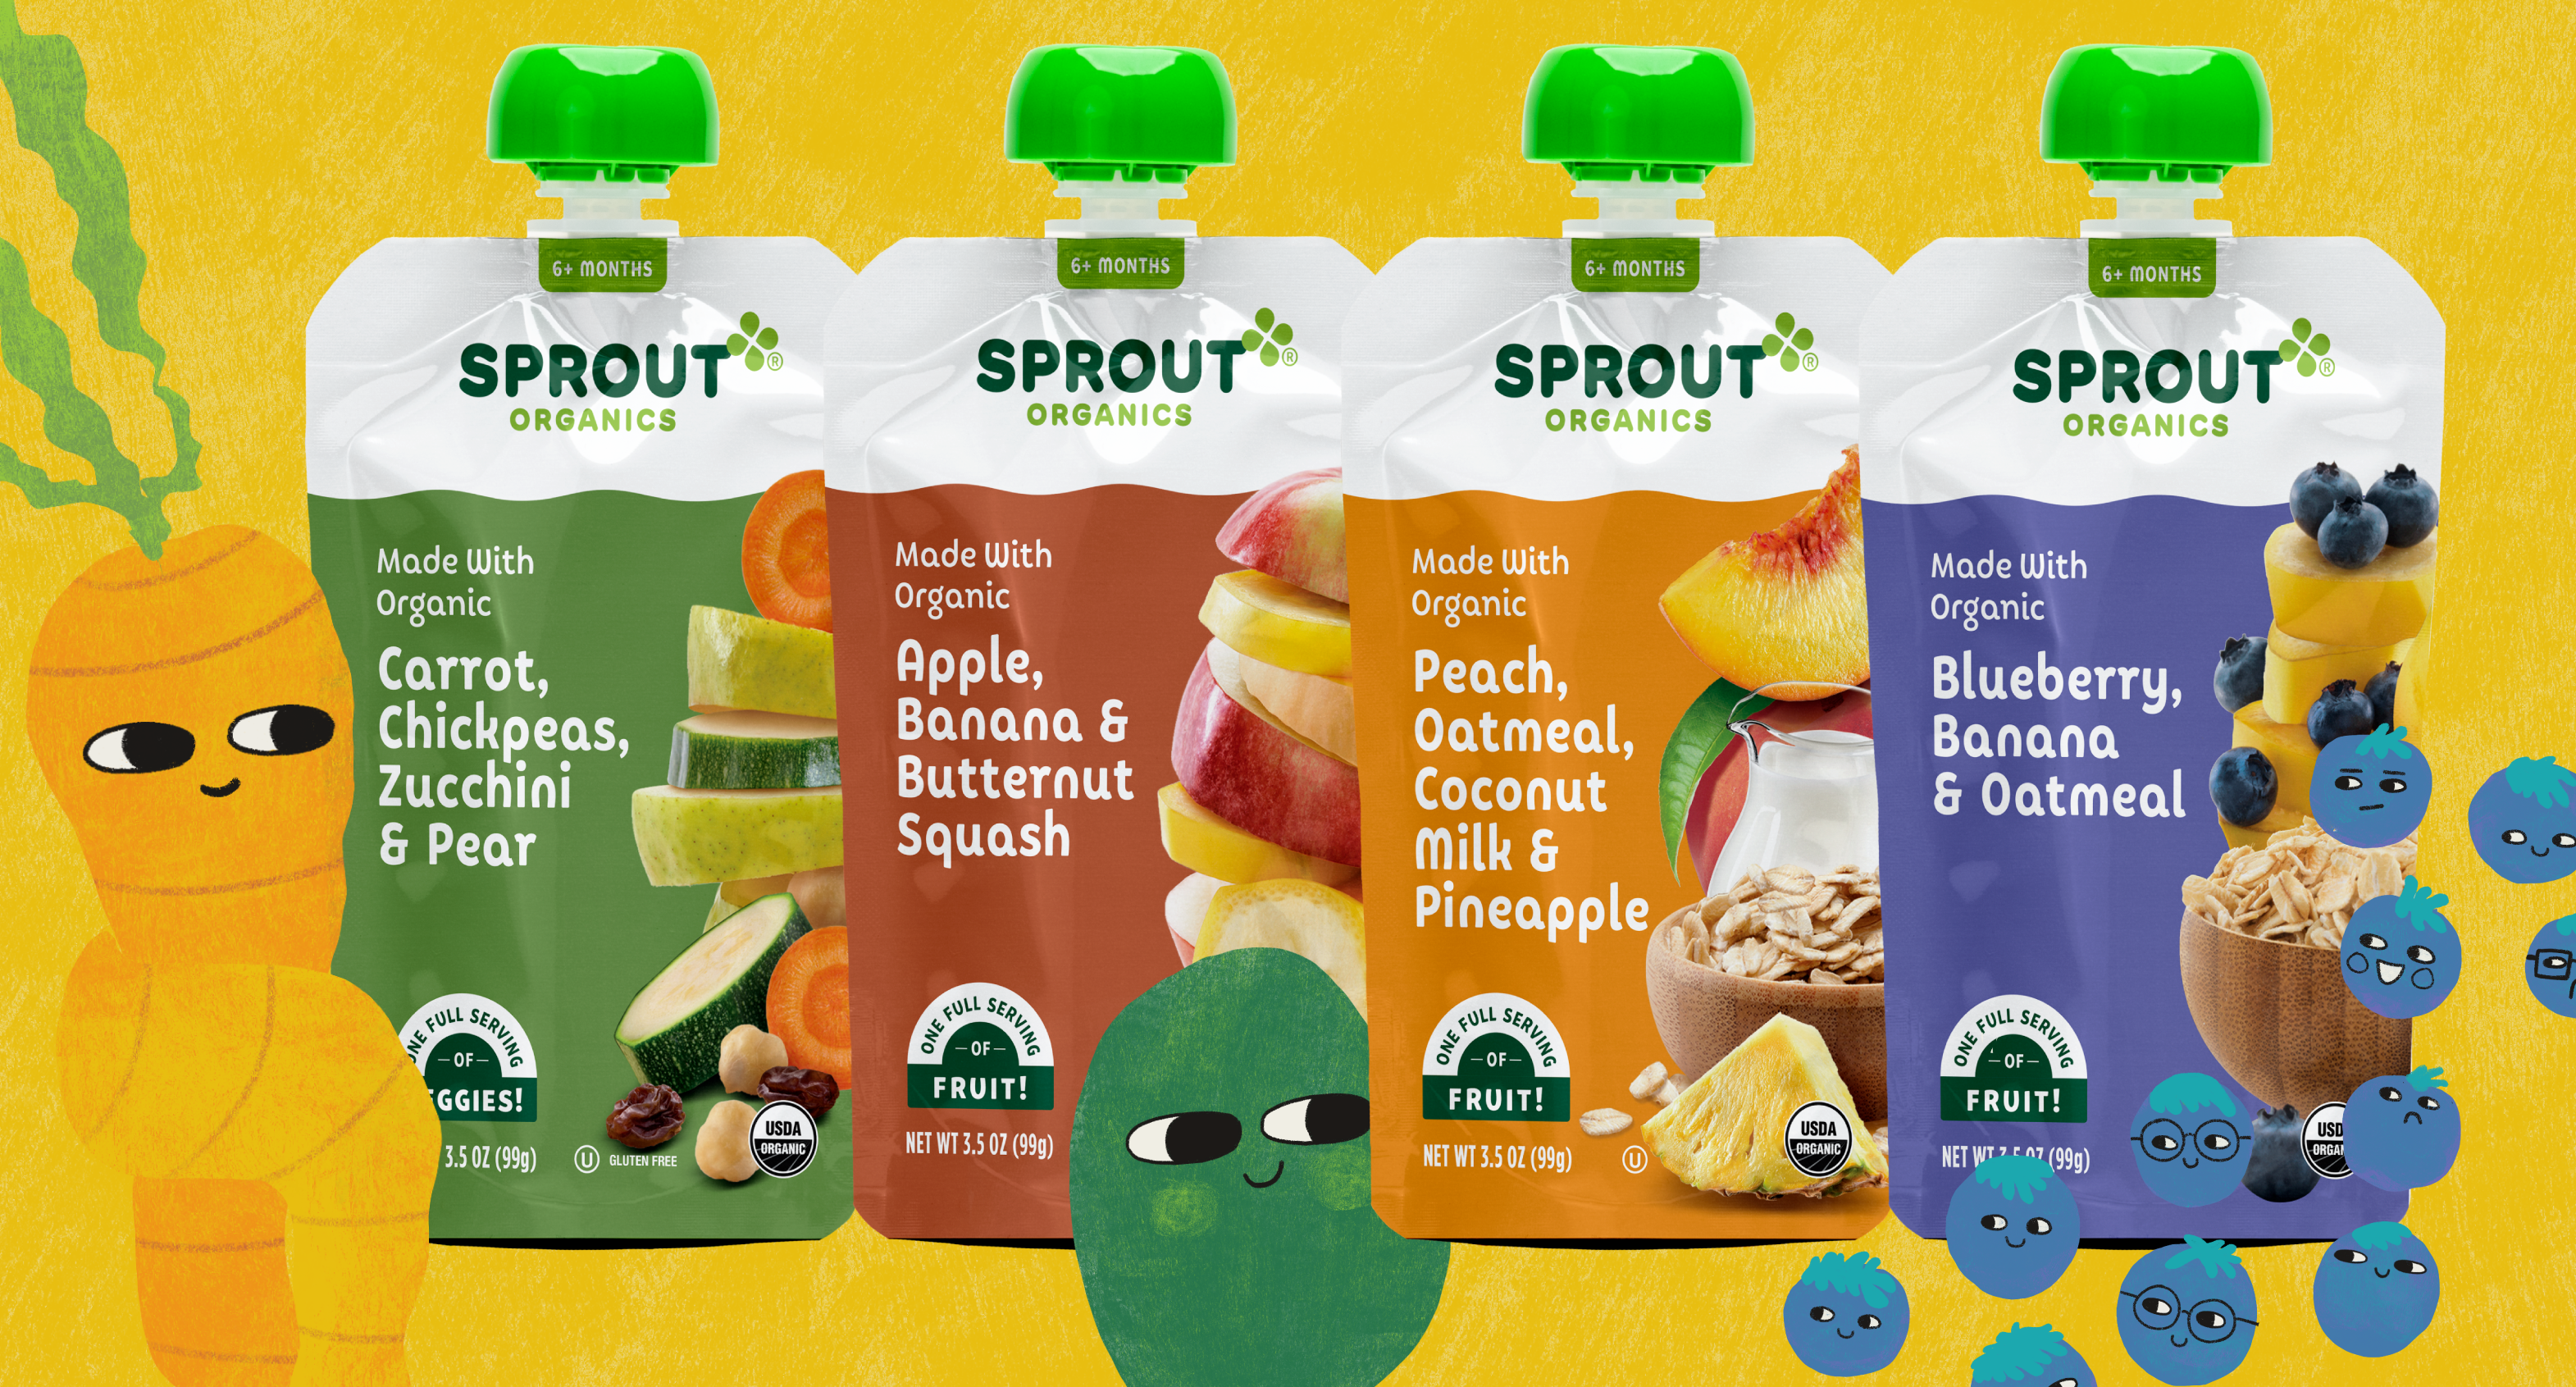 sprout organics 6+ month pouches on a yellow background